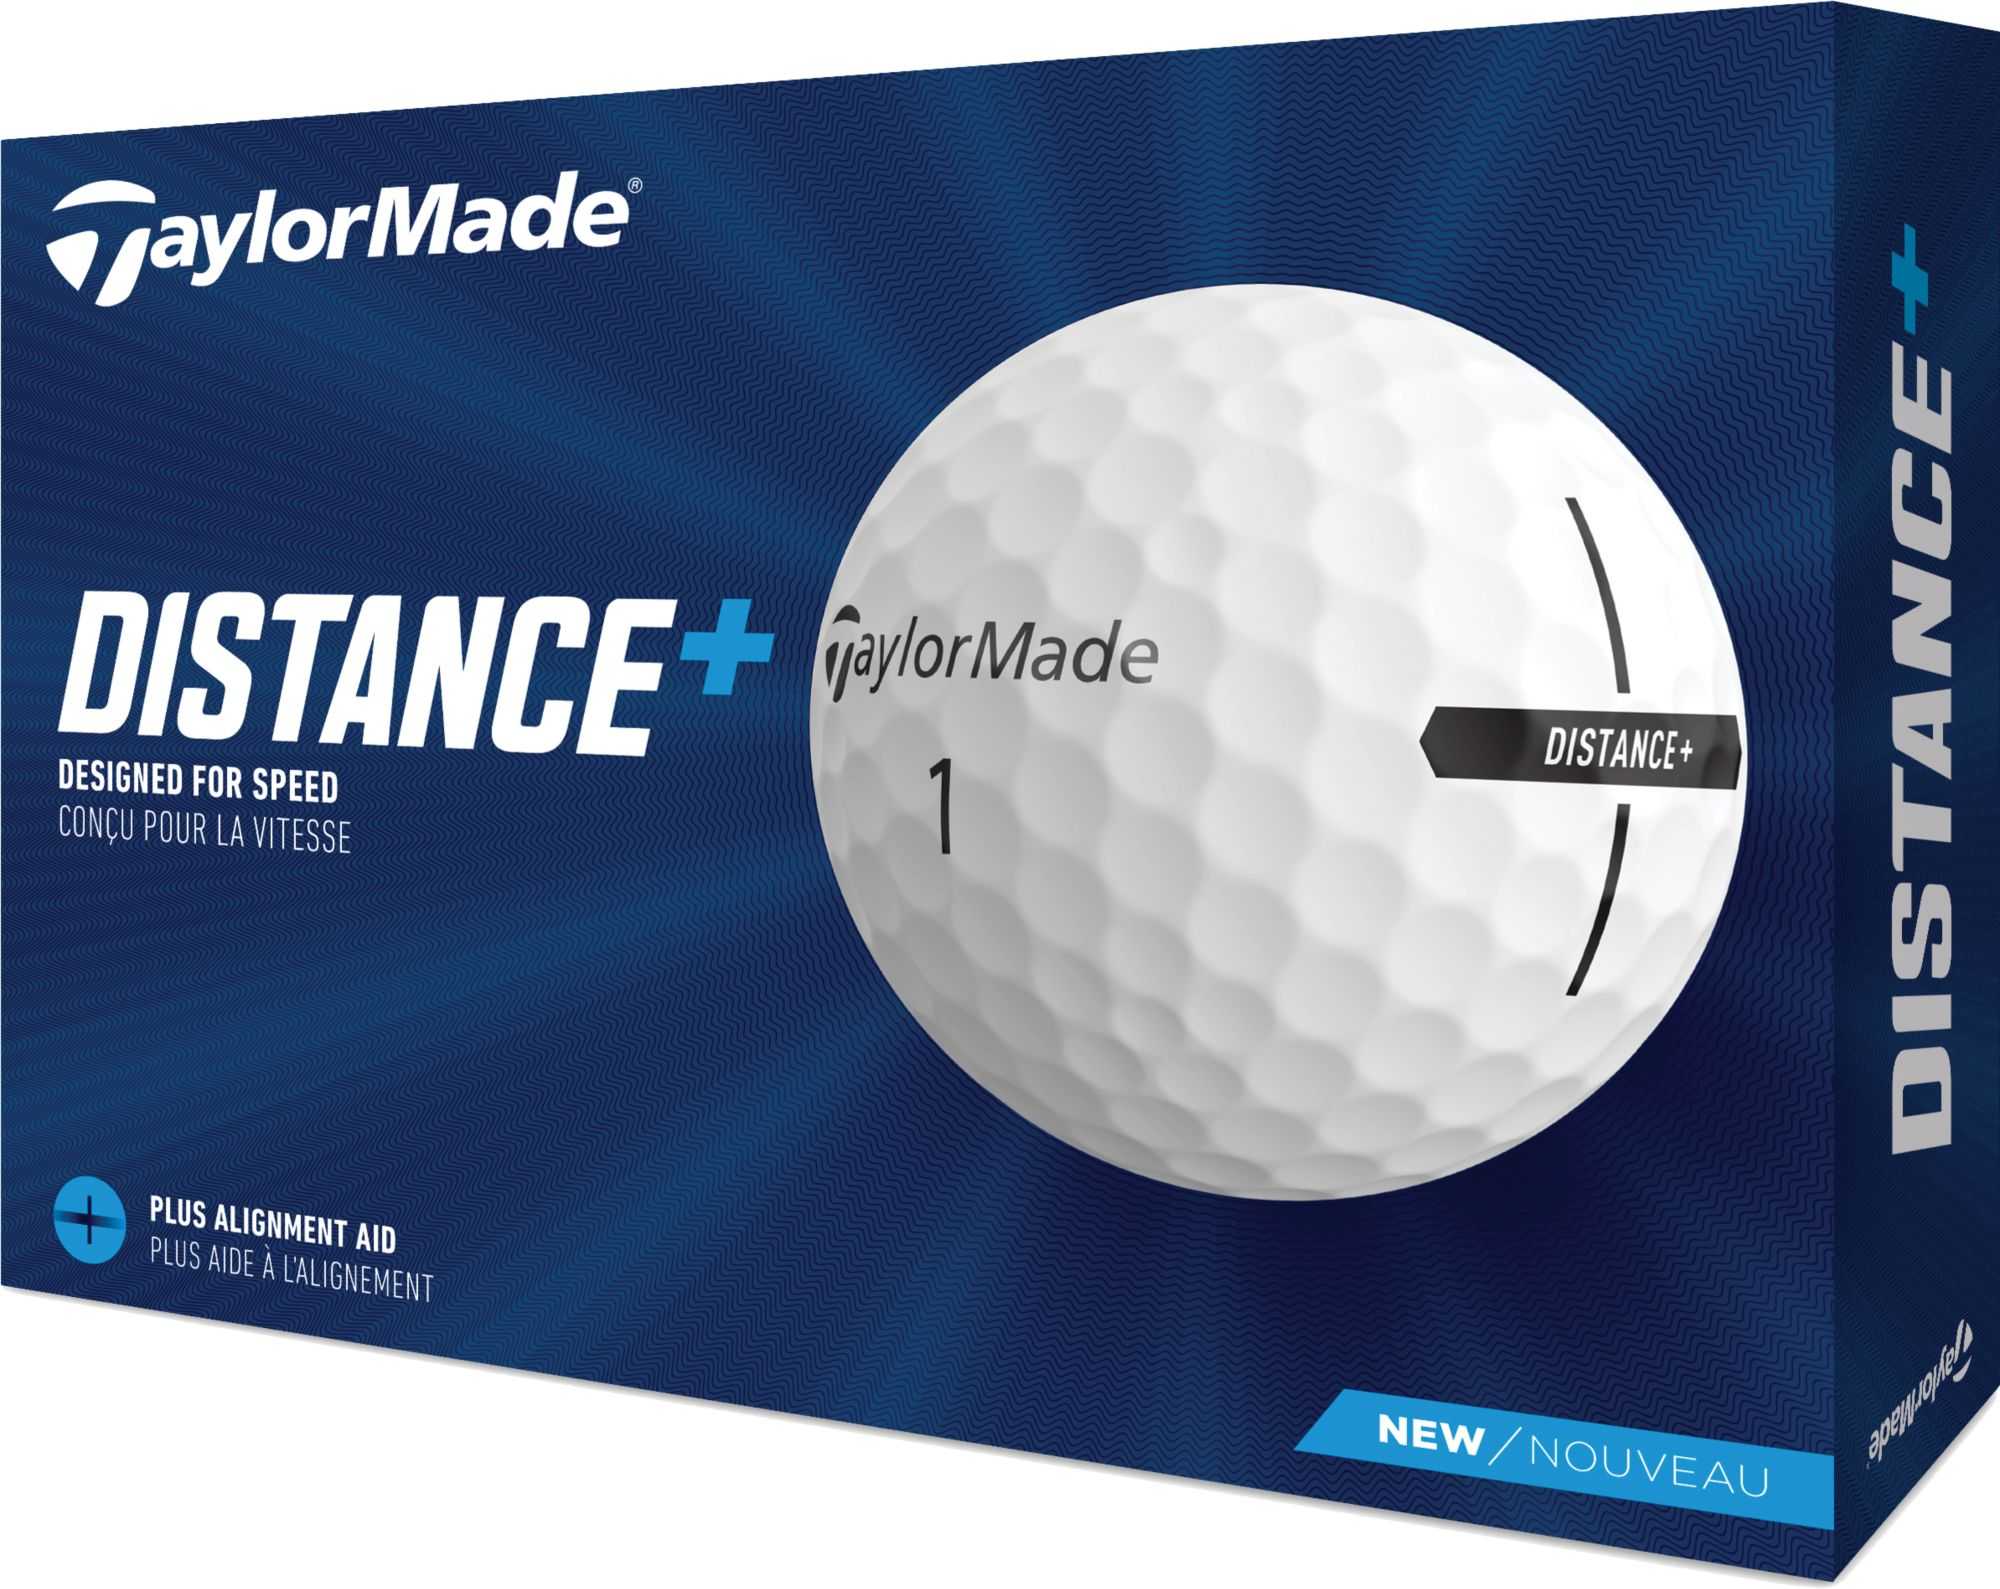 TaylorMade Distance+ Golf Balls, Men's | Holiday Gift